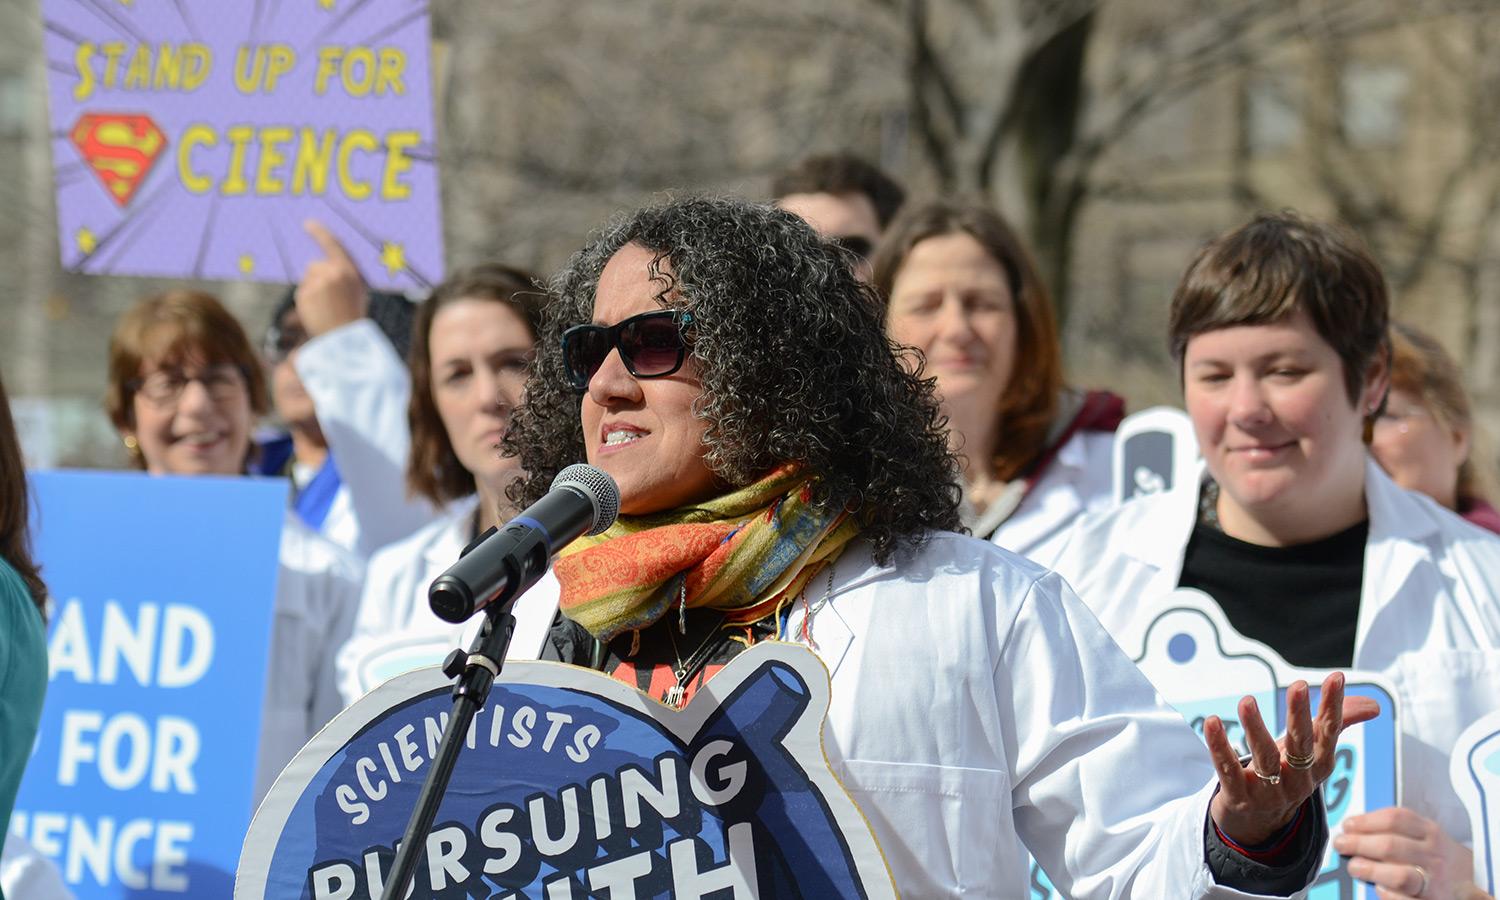 UCS scientist Astrid Caldas at a rally in 2017